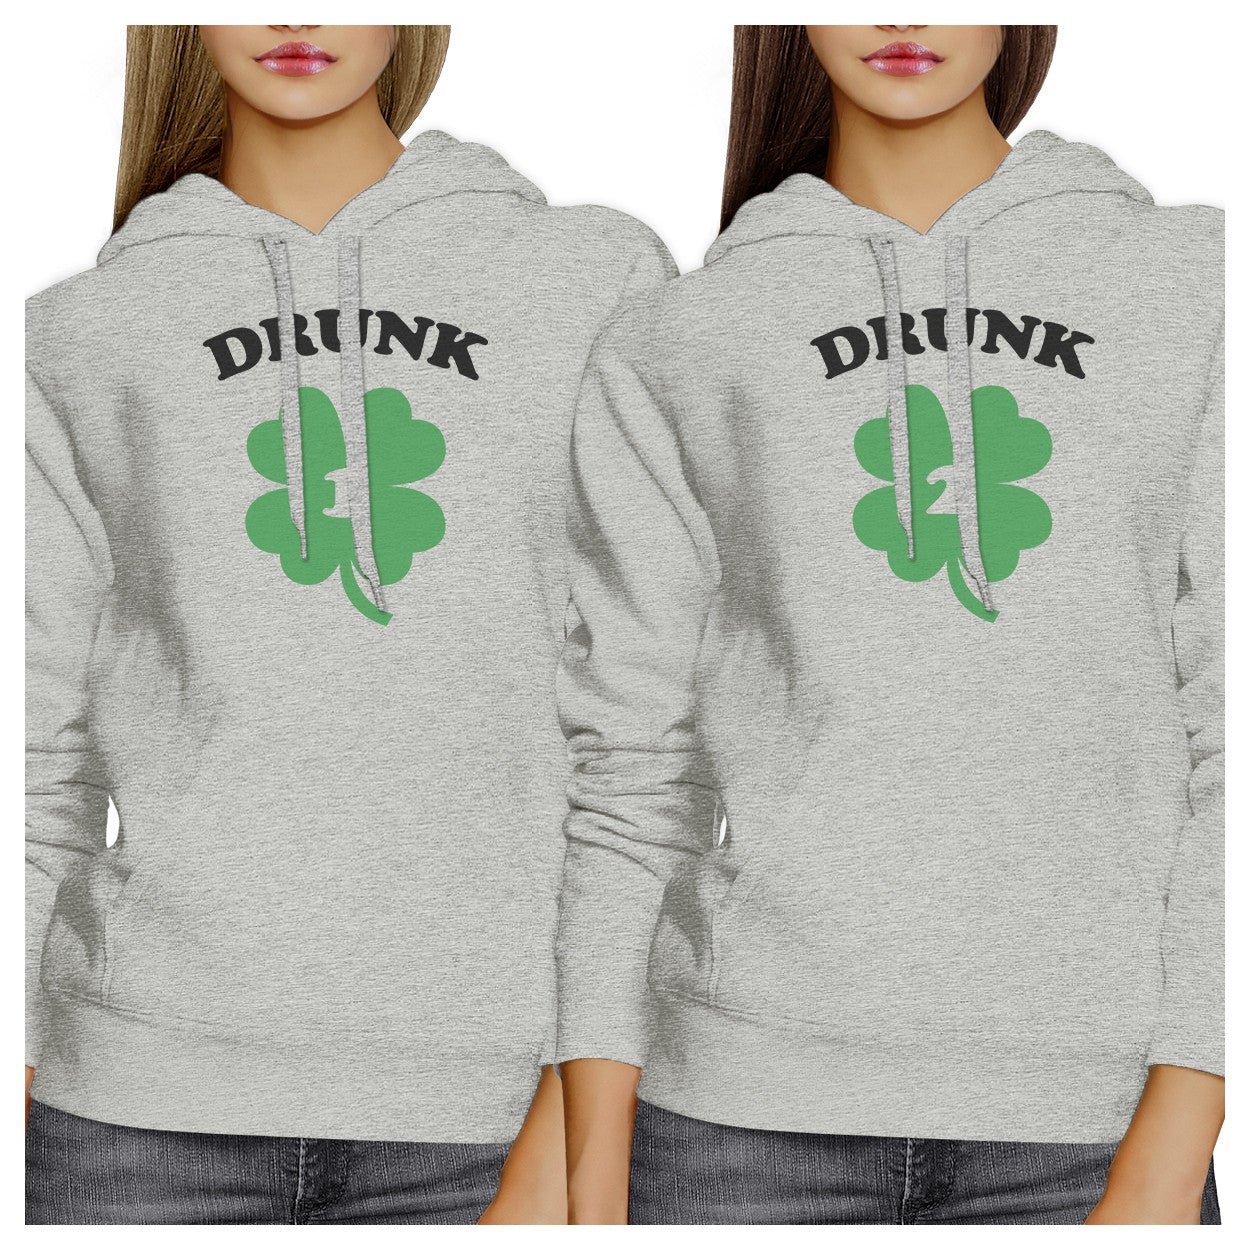 Drunk1 Drunk 2 Cute Bff Matching Hoodies Pullover Funny Gift Ideas - 365 In Love